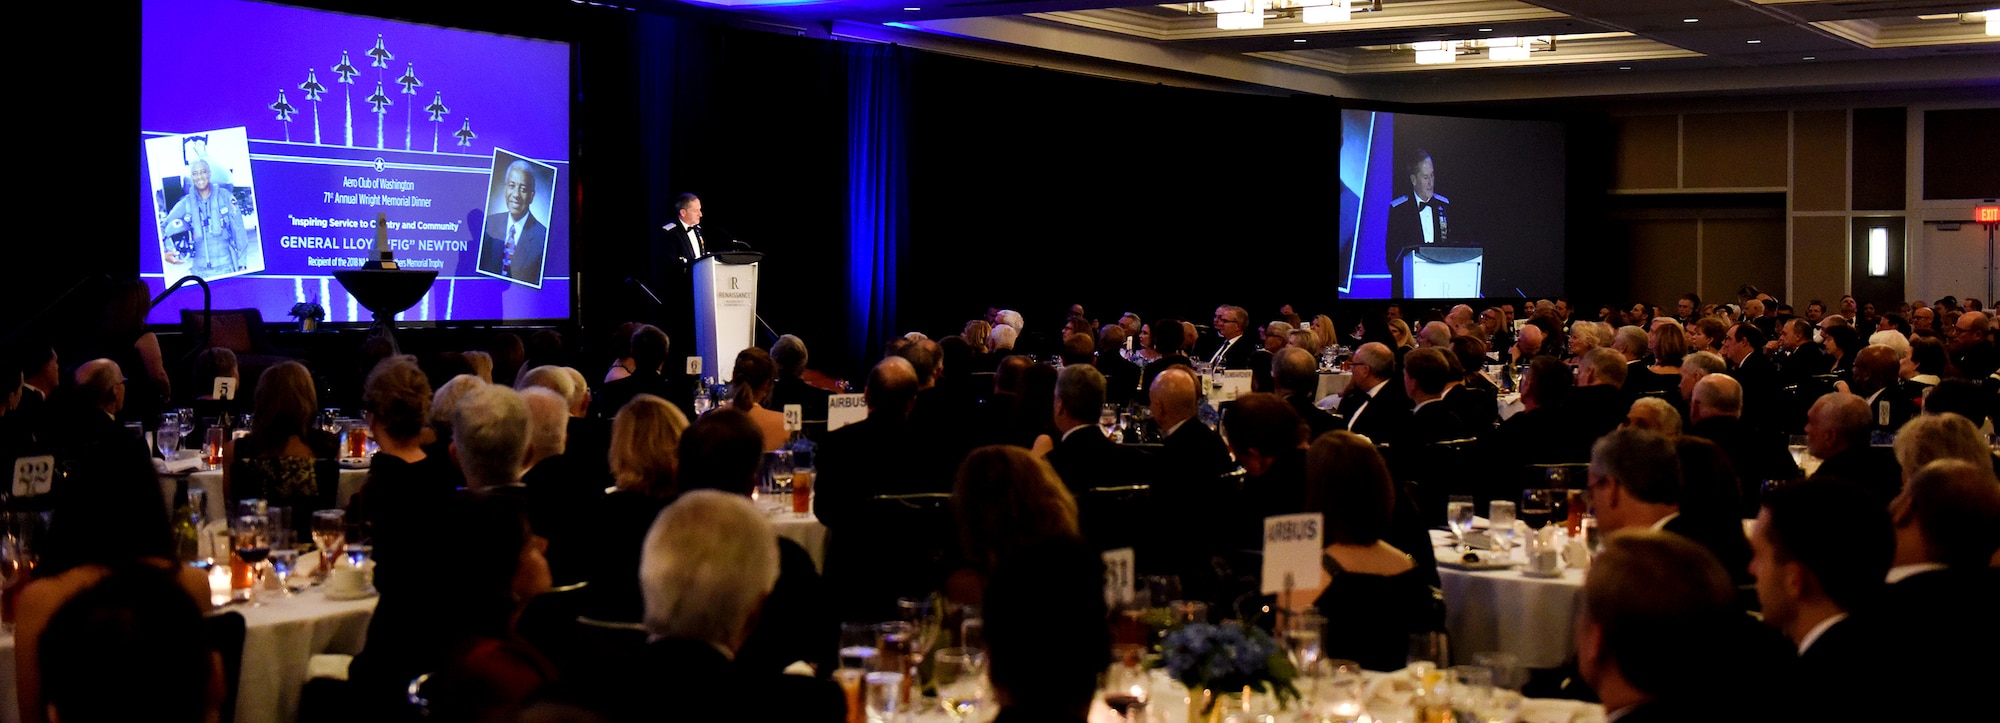 Air Force Chief of Staff Gen. David L. Goldfein delivers remarks during the 71st National Aeronautics Association Wright Brothers Memorial Dinner in Washington, D.C., Dec. 14, 2018. Goldfein introduced retired Gen. Lloyd Newton, the 2018 Wright Brothers Memorial Trophy winner. (U.S. Air Force photo by Staff Sgt. Rusty Frank)